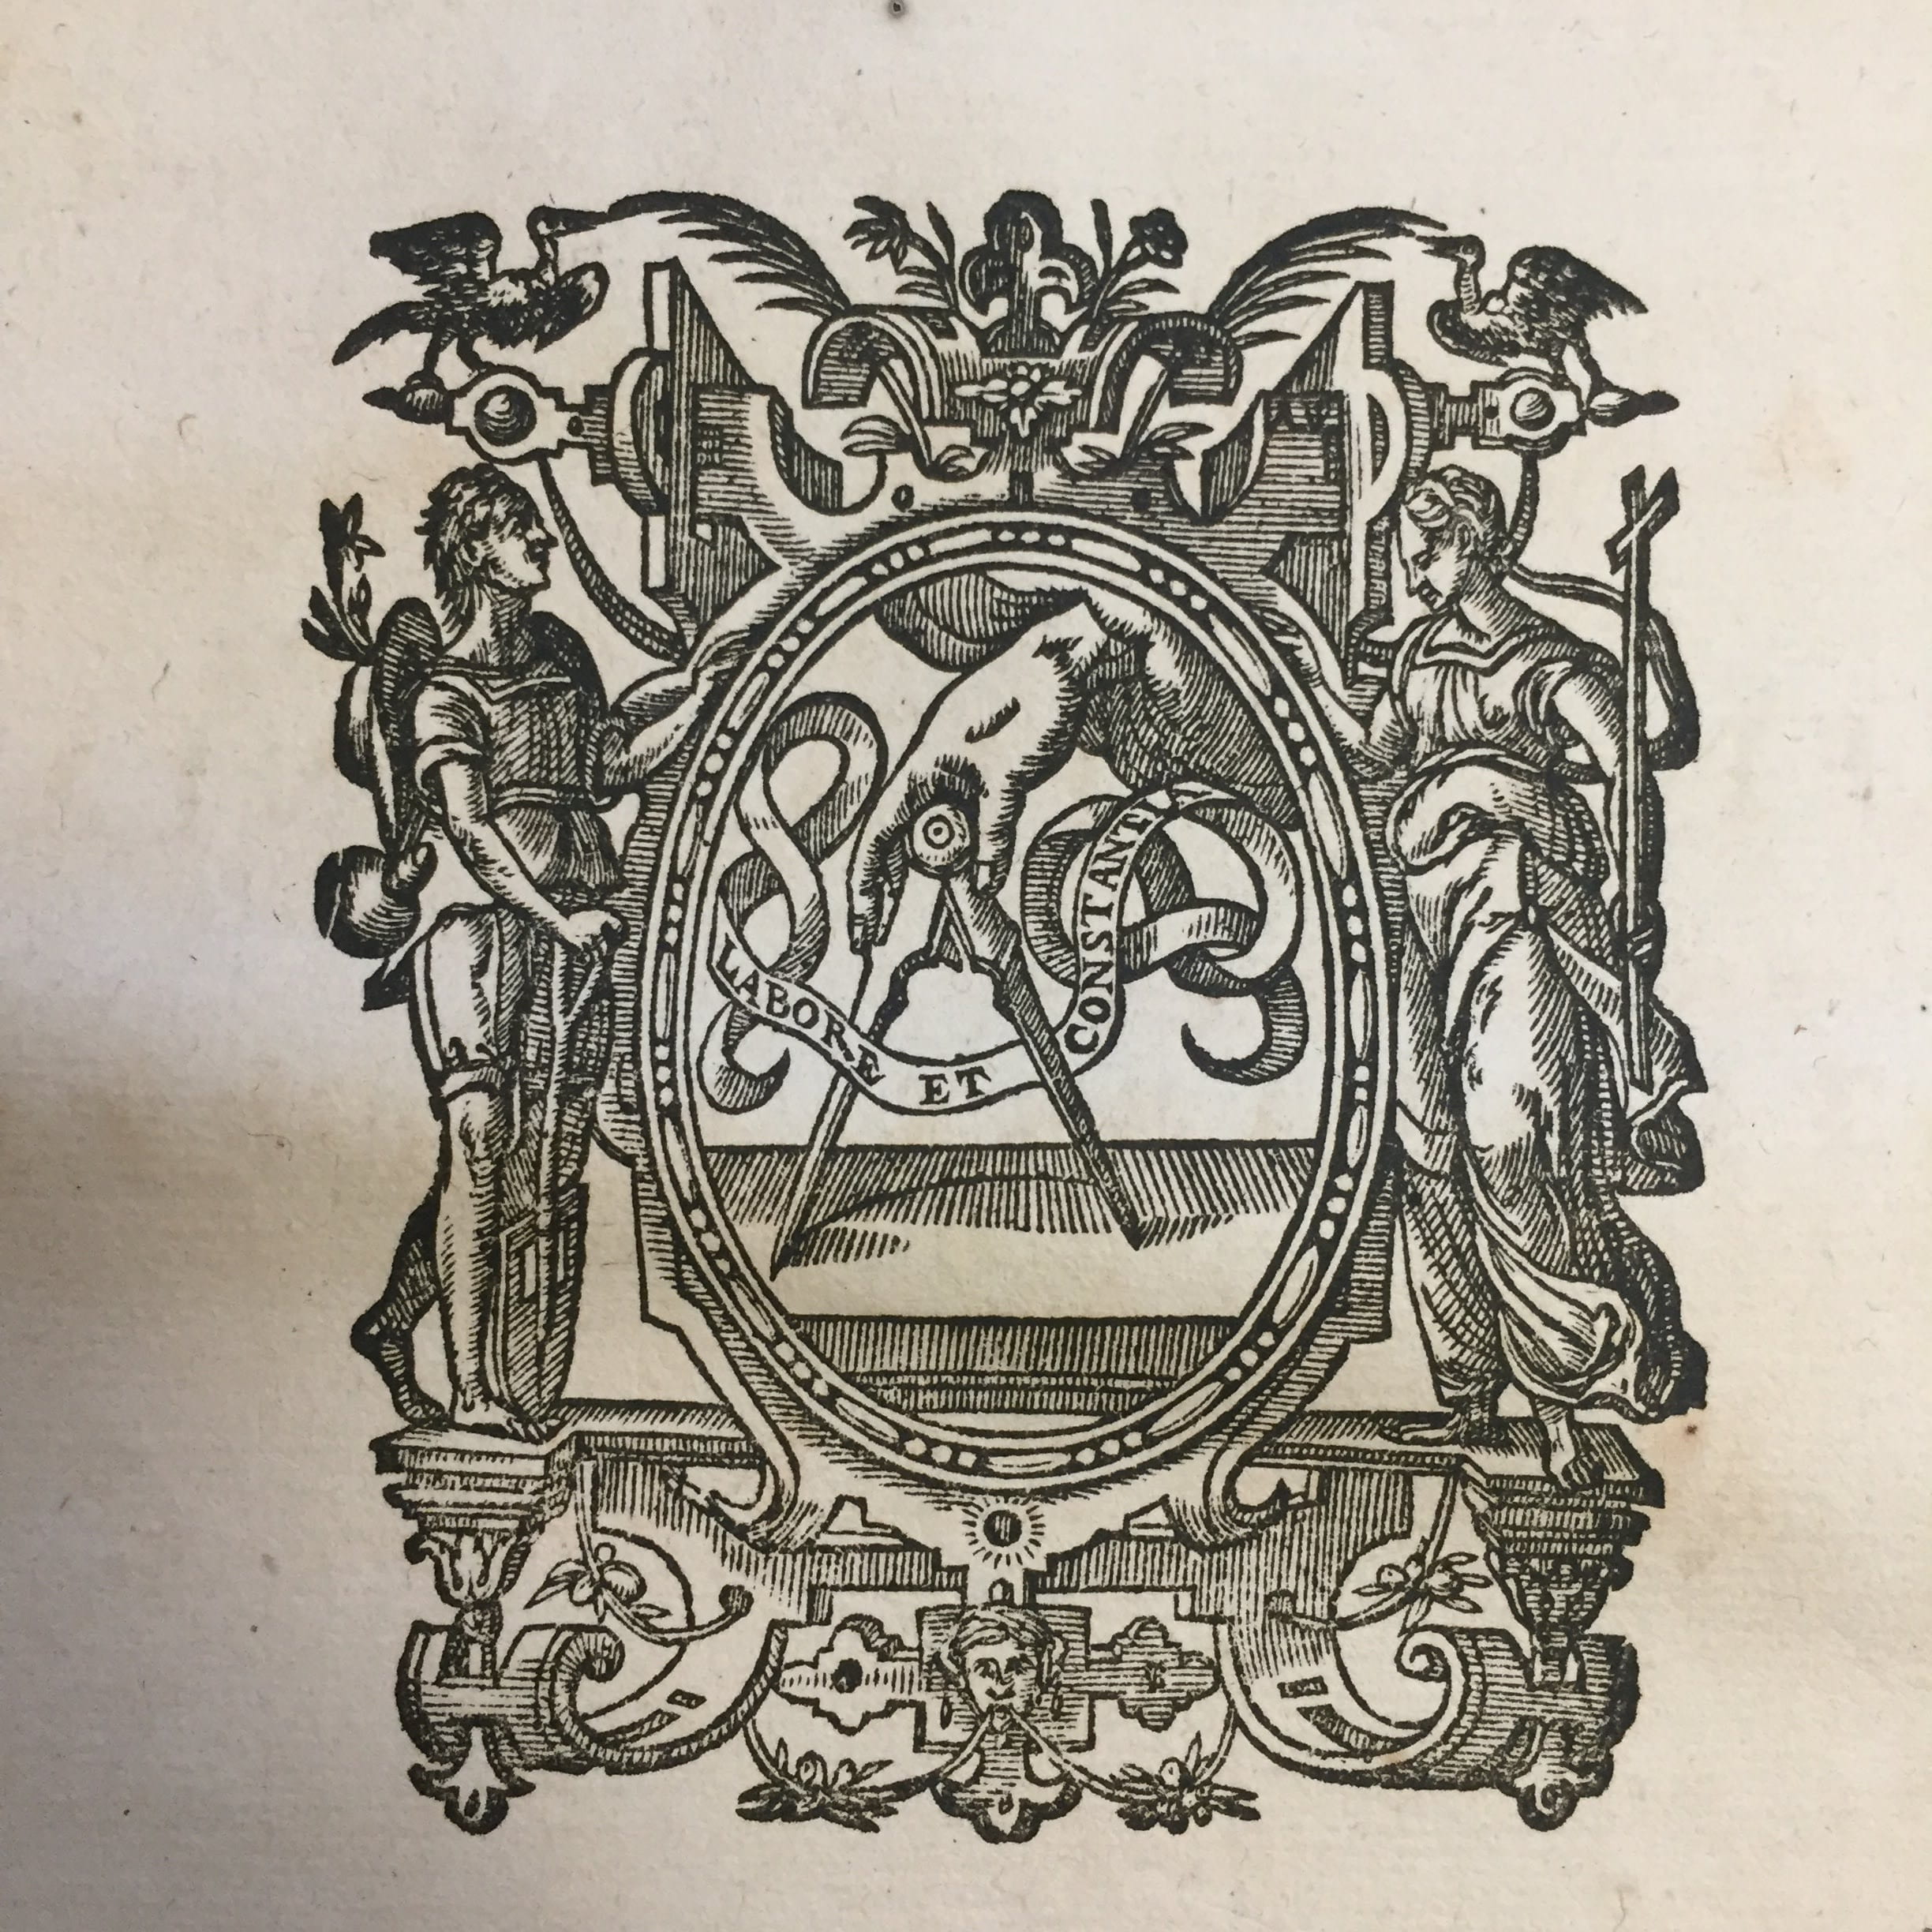 Printer's device on title page from Pontificale Romanum Clementis VIII (1627)